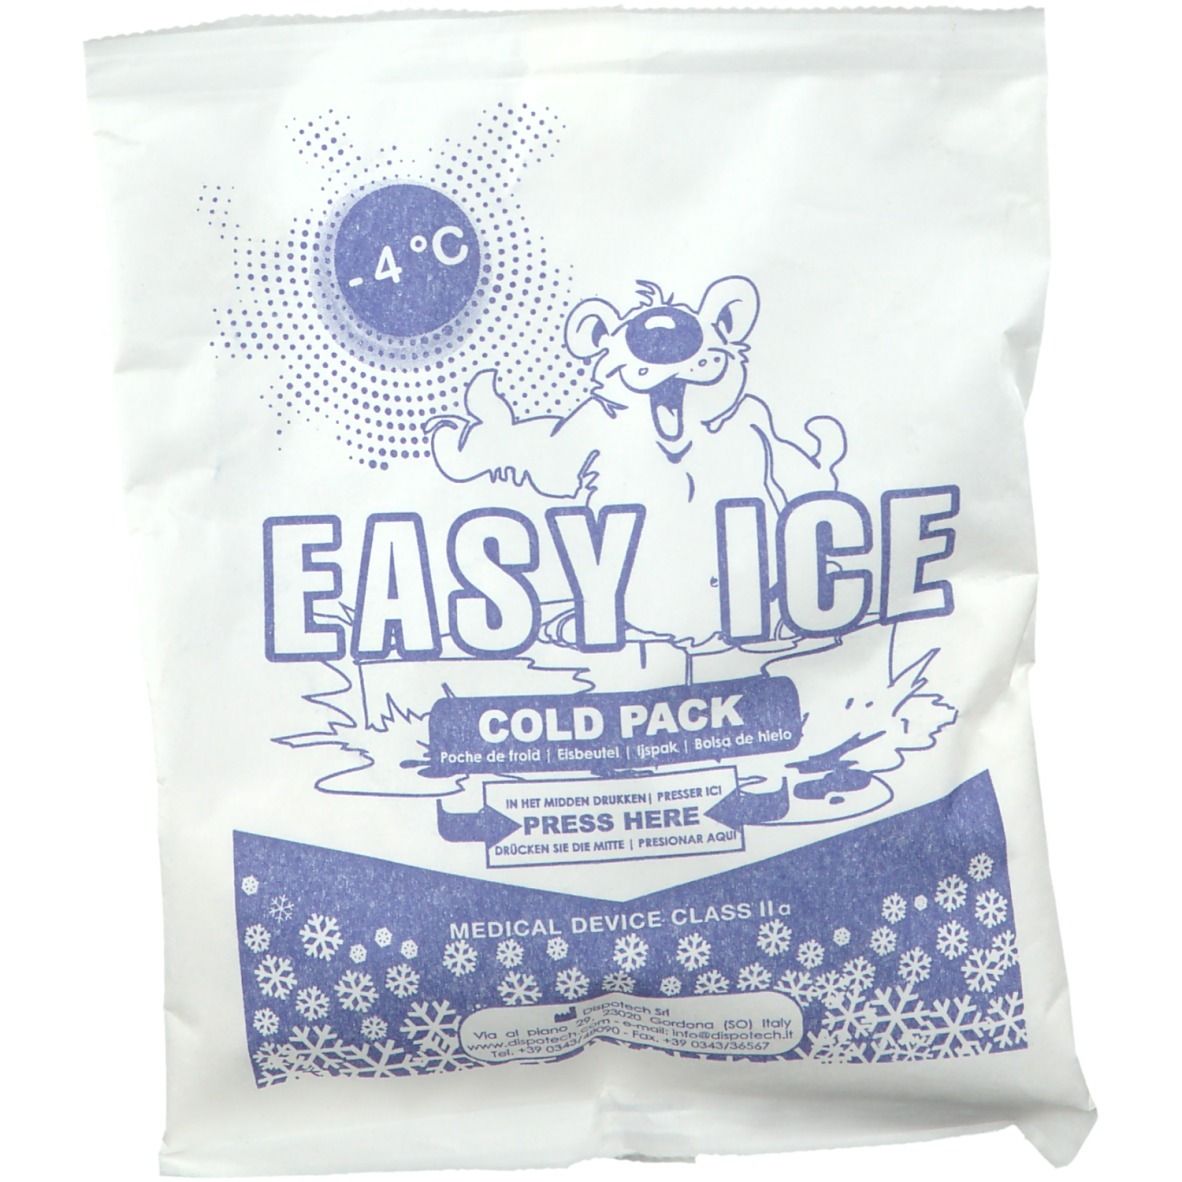 Easy Ice cold pack 19 x 14 cm